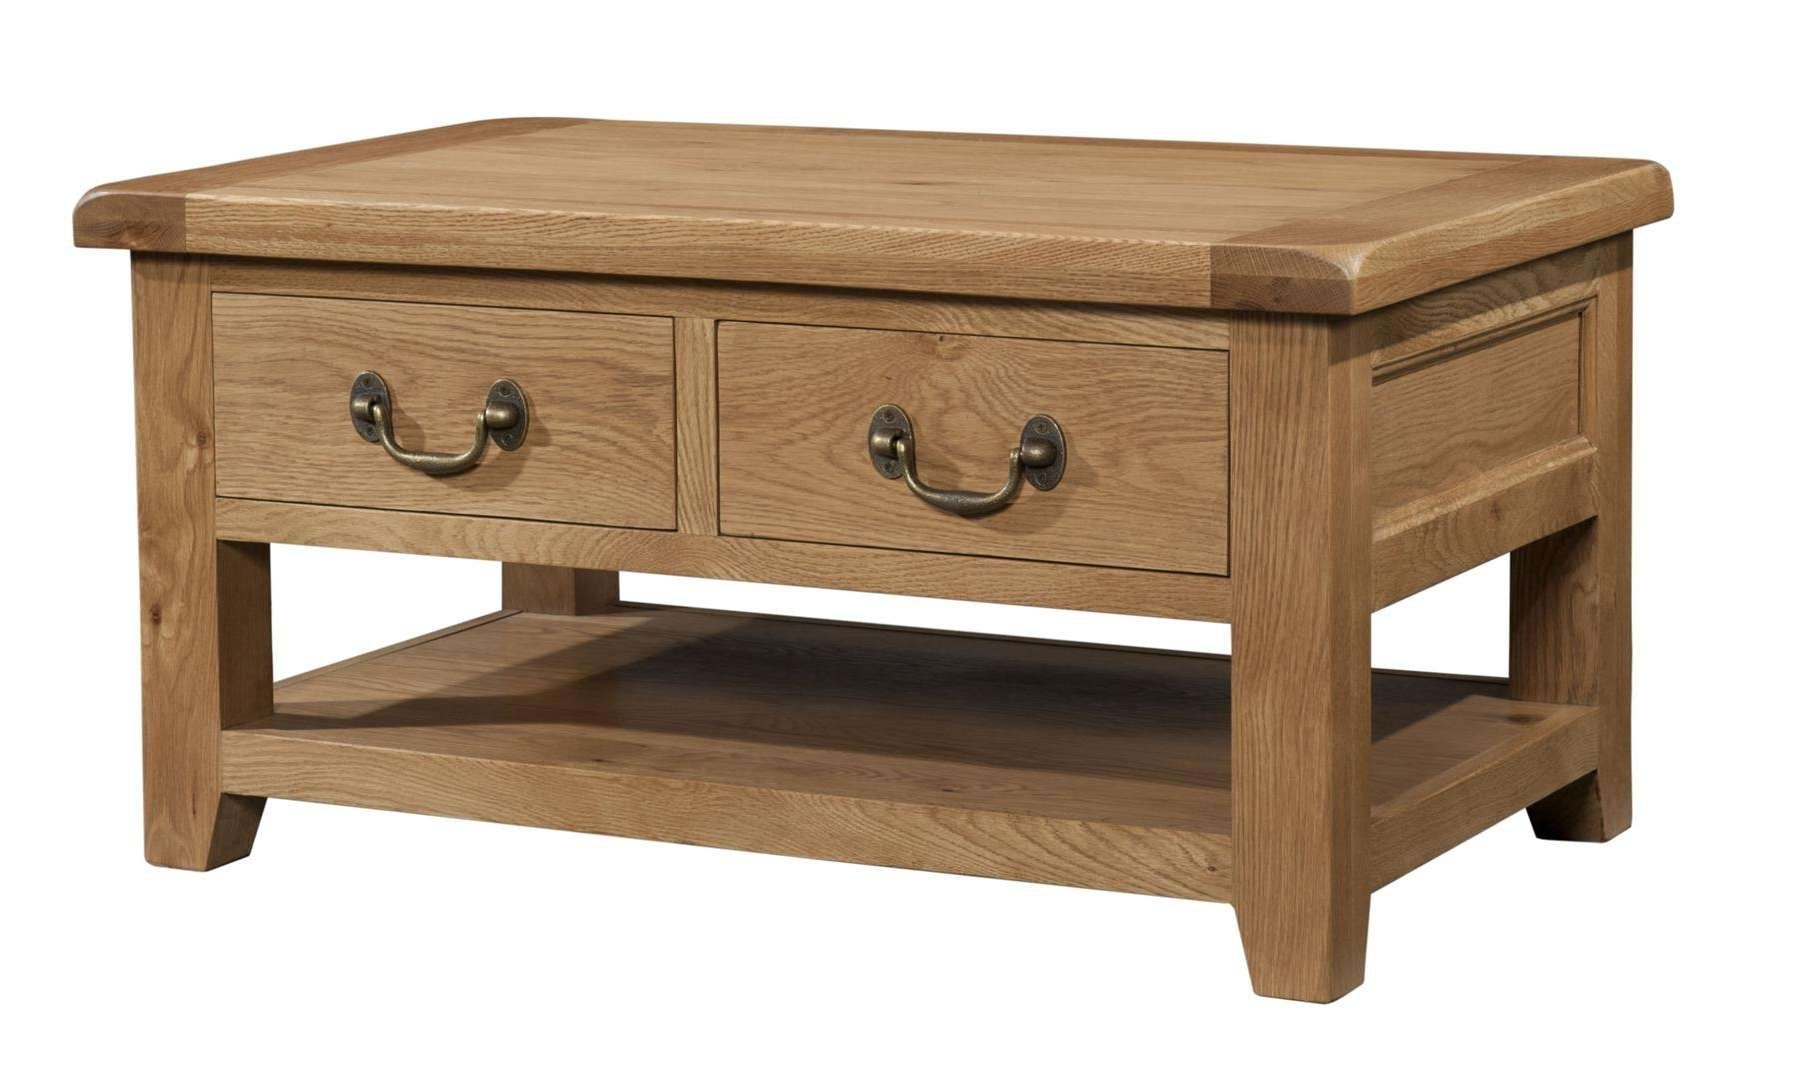 Well Liked Rustic Oak Coffee Table With Drawers Inside Somerset Chunky Oak Furniture : Somerset Chunky Oak Coffee Table (View 17 of 20)